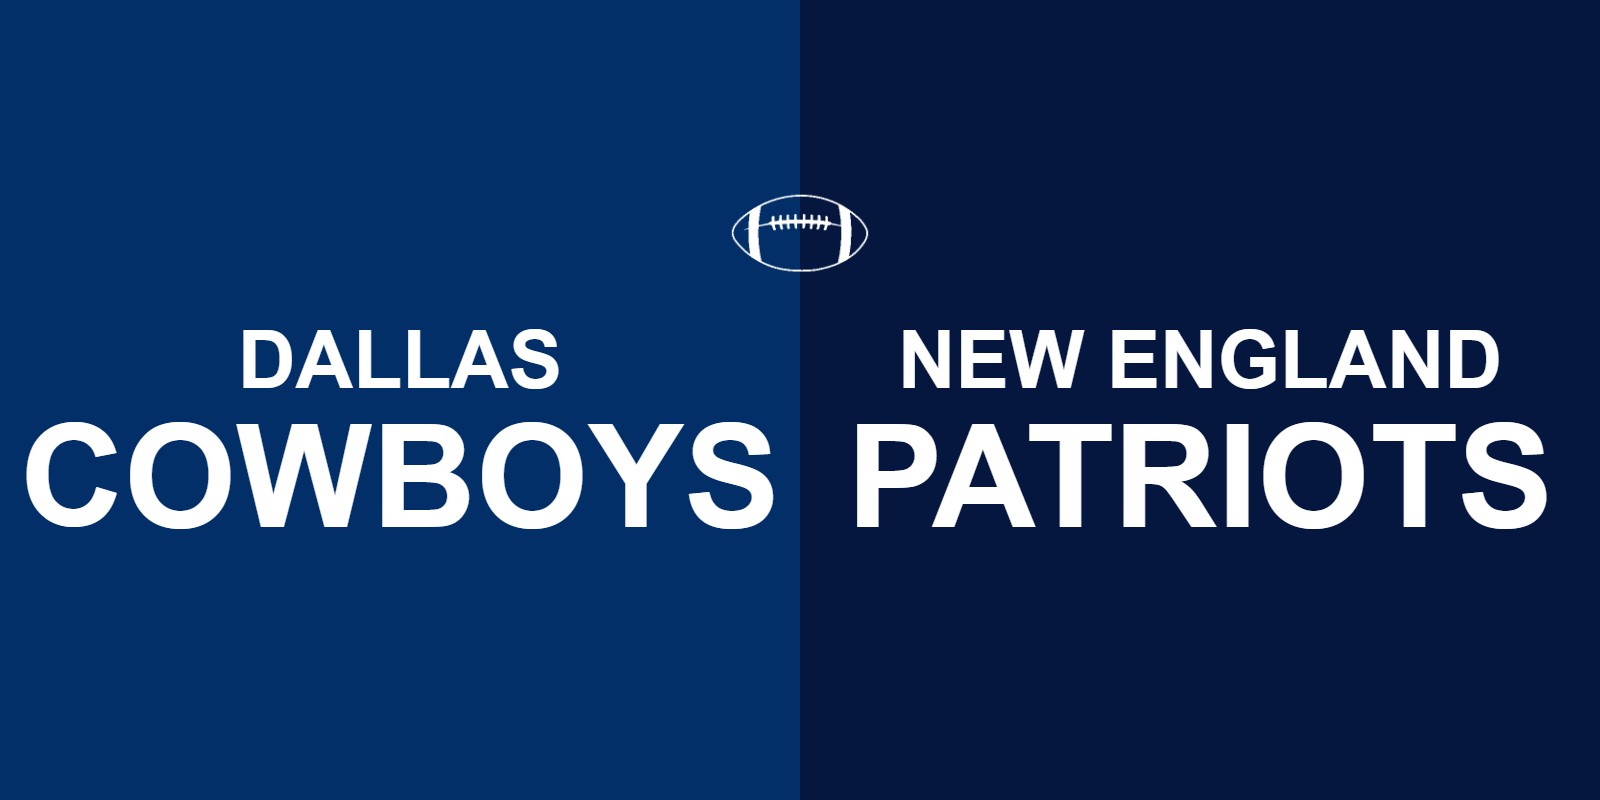 How to get cheap Dallas Cowboys vs. New England Patriots tickets